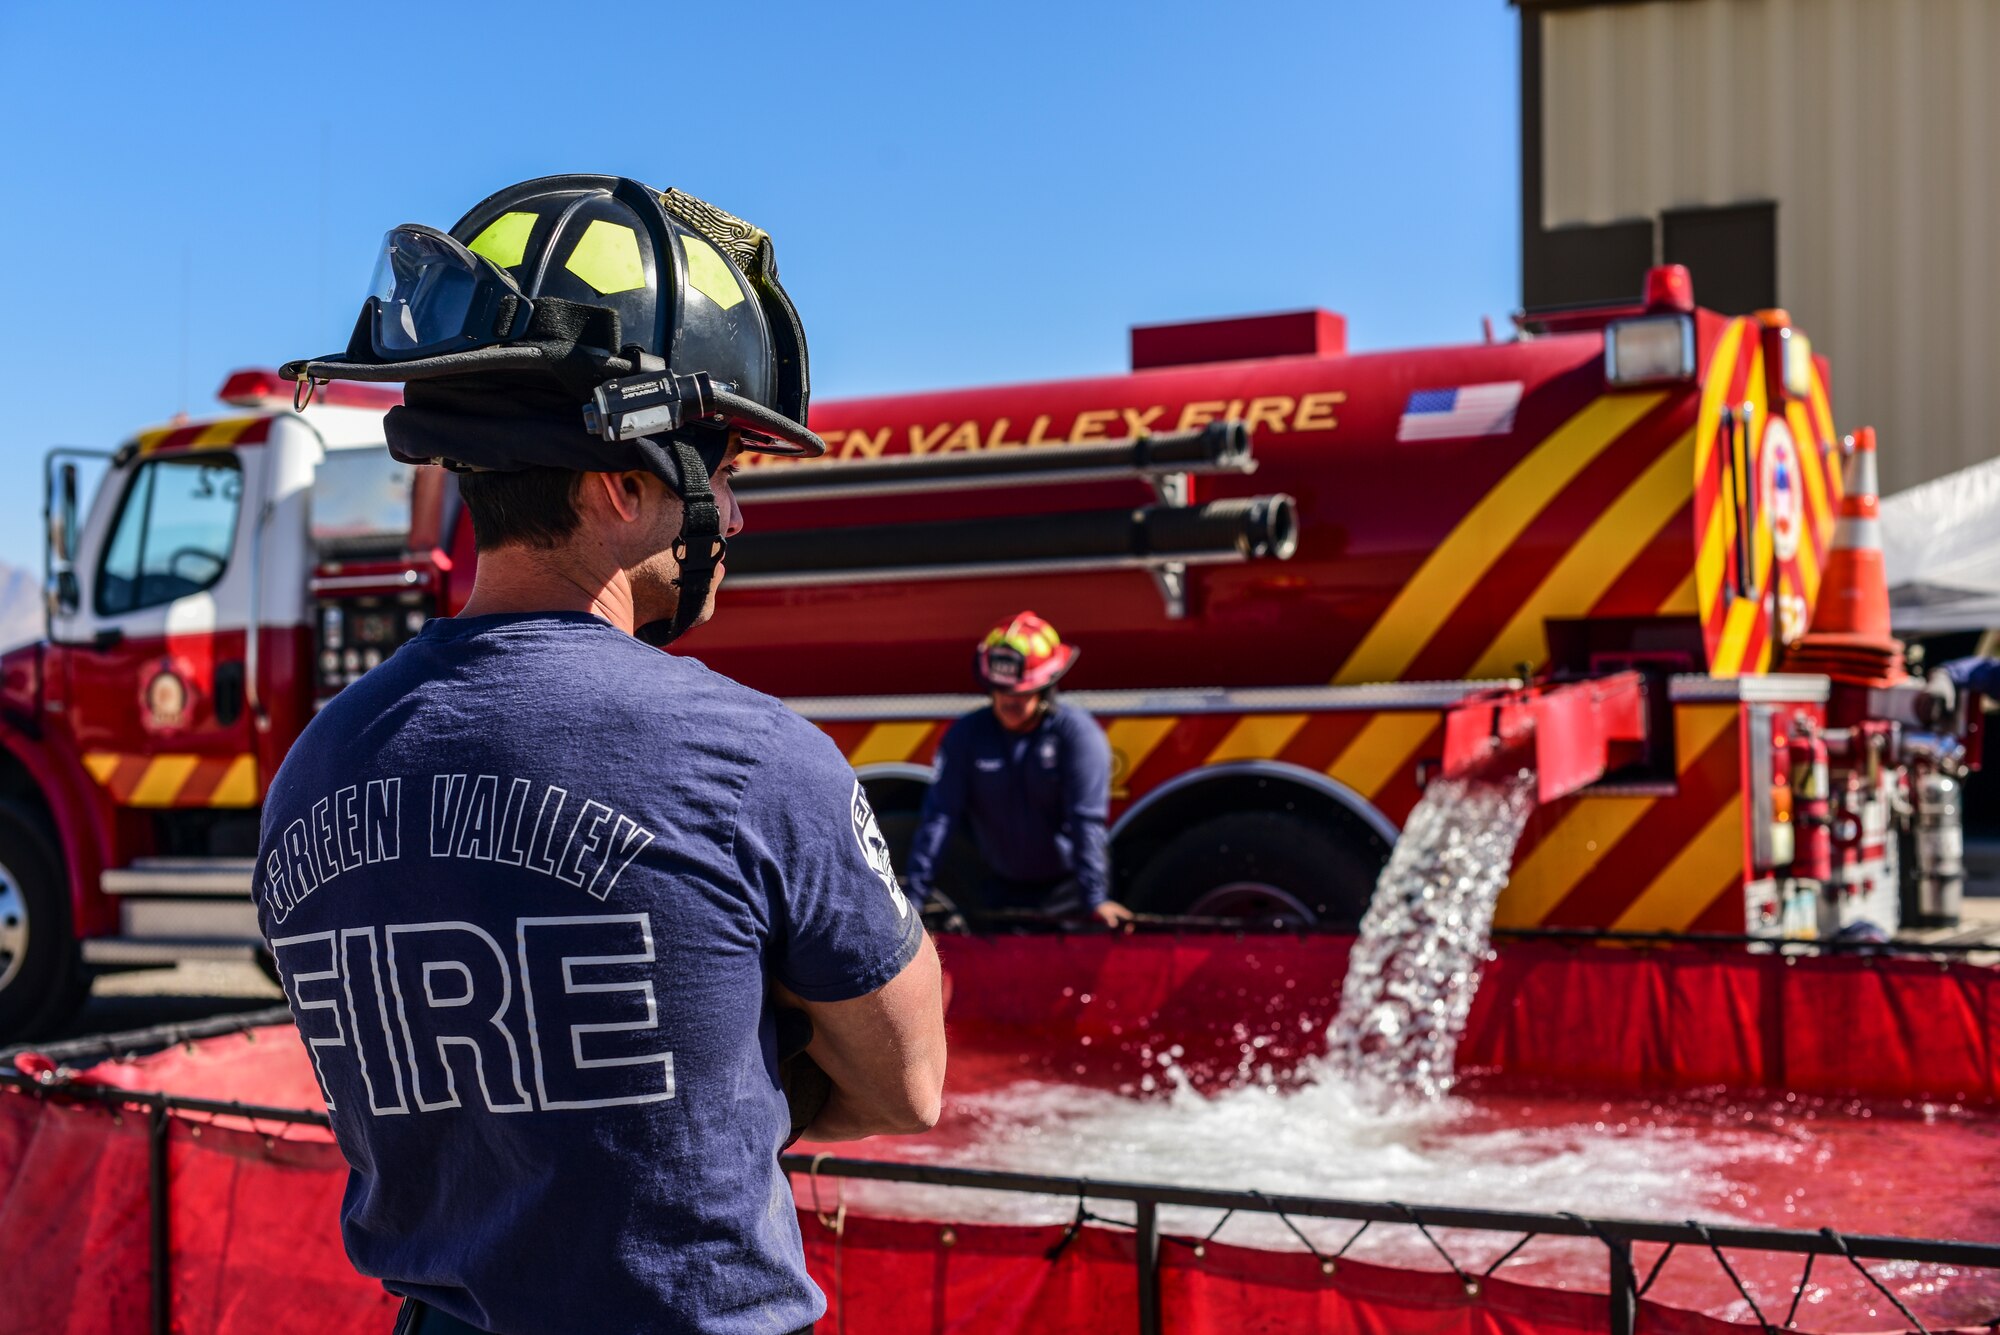 A photo of a firefighter filling a portable water tank.